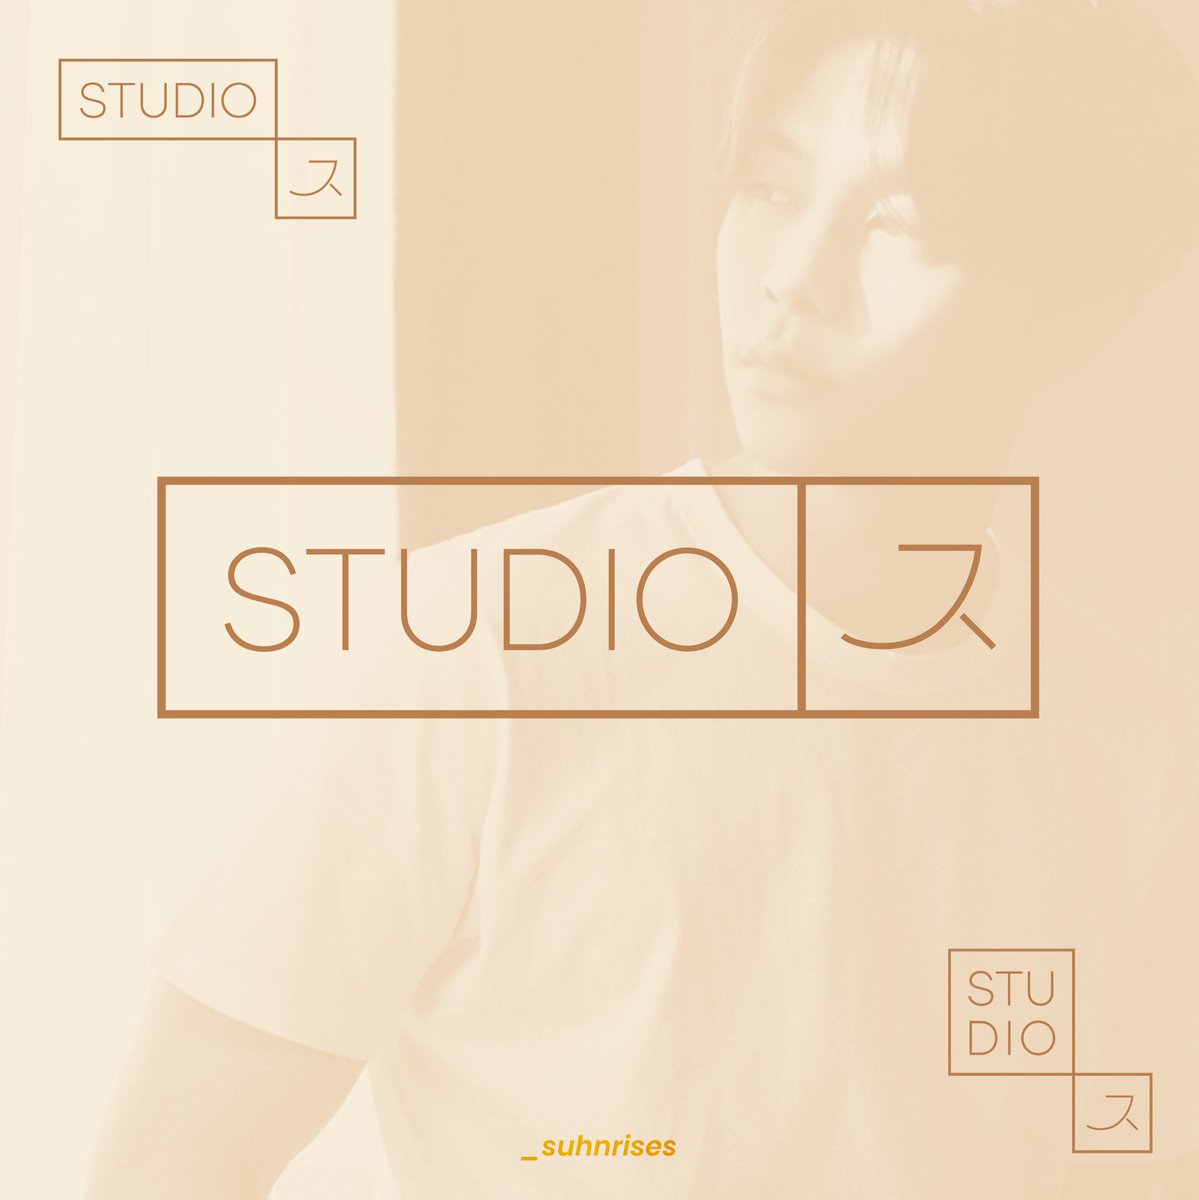 johnny: studio j- indie film studio so he can make freaky handshake 2- modular logo for the element of surprise (variations in the corners) and incorporates “ㅈ” and “J” into the logo- makes award winning films,,,, the talent 